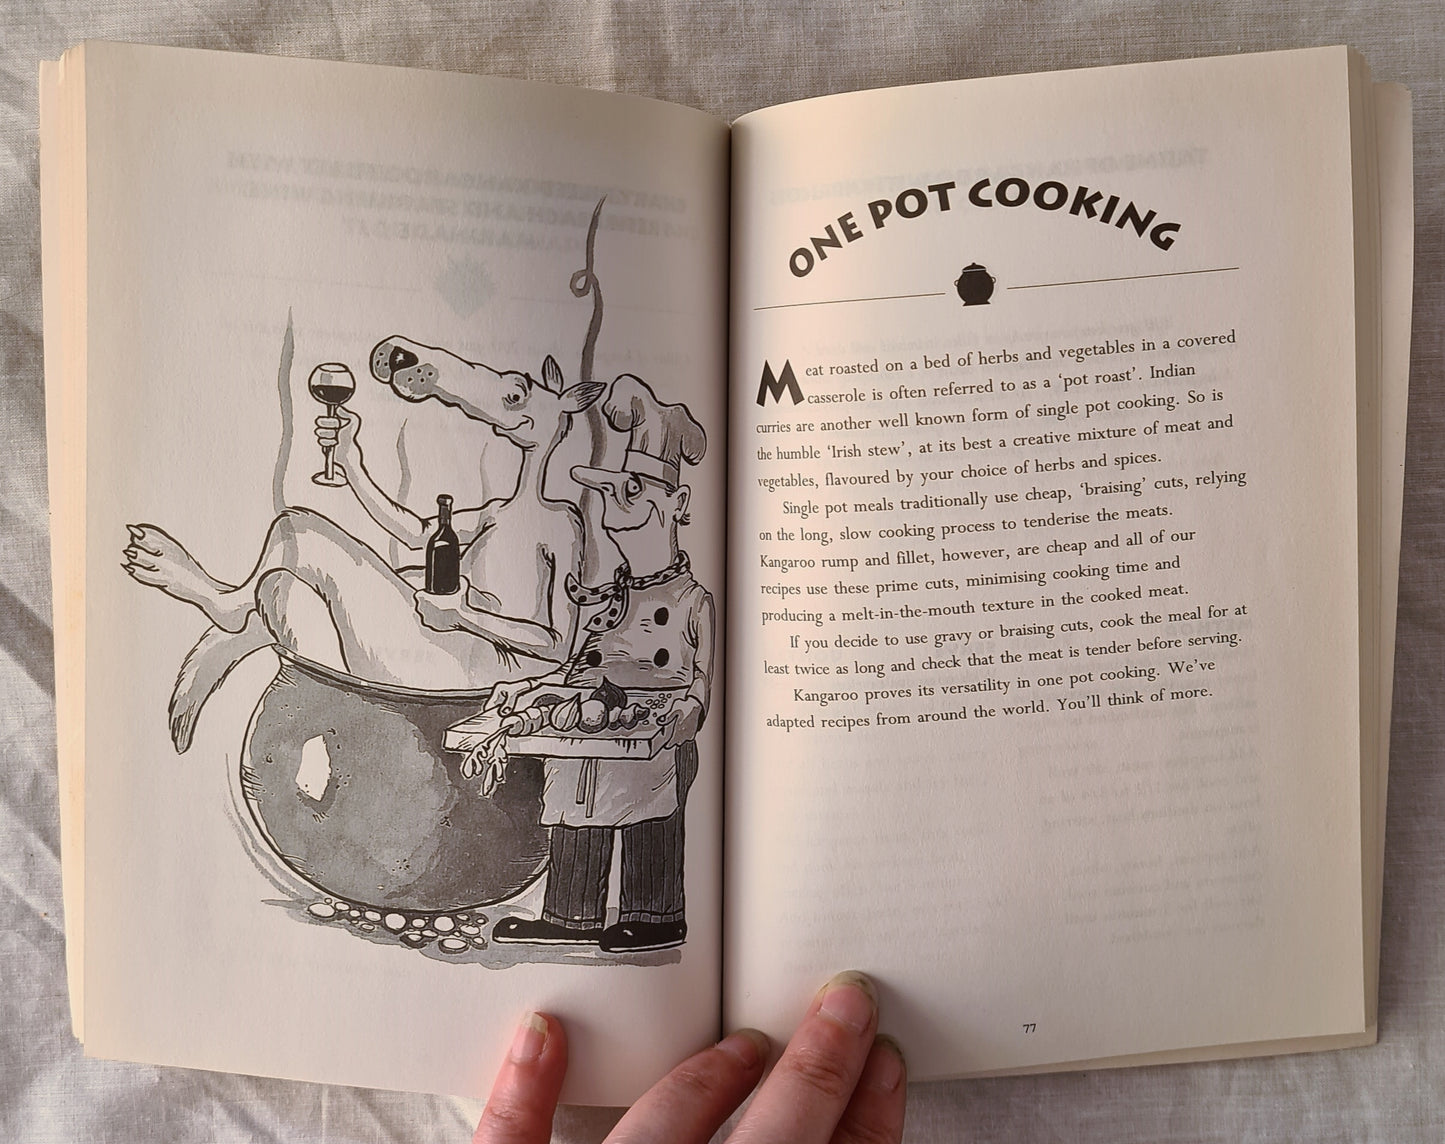 Kangaroo Cookin’ by Peter Winch, Andrew Thompson and Kent McCormack